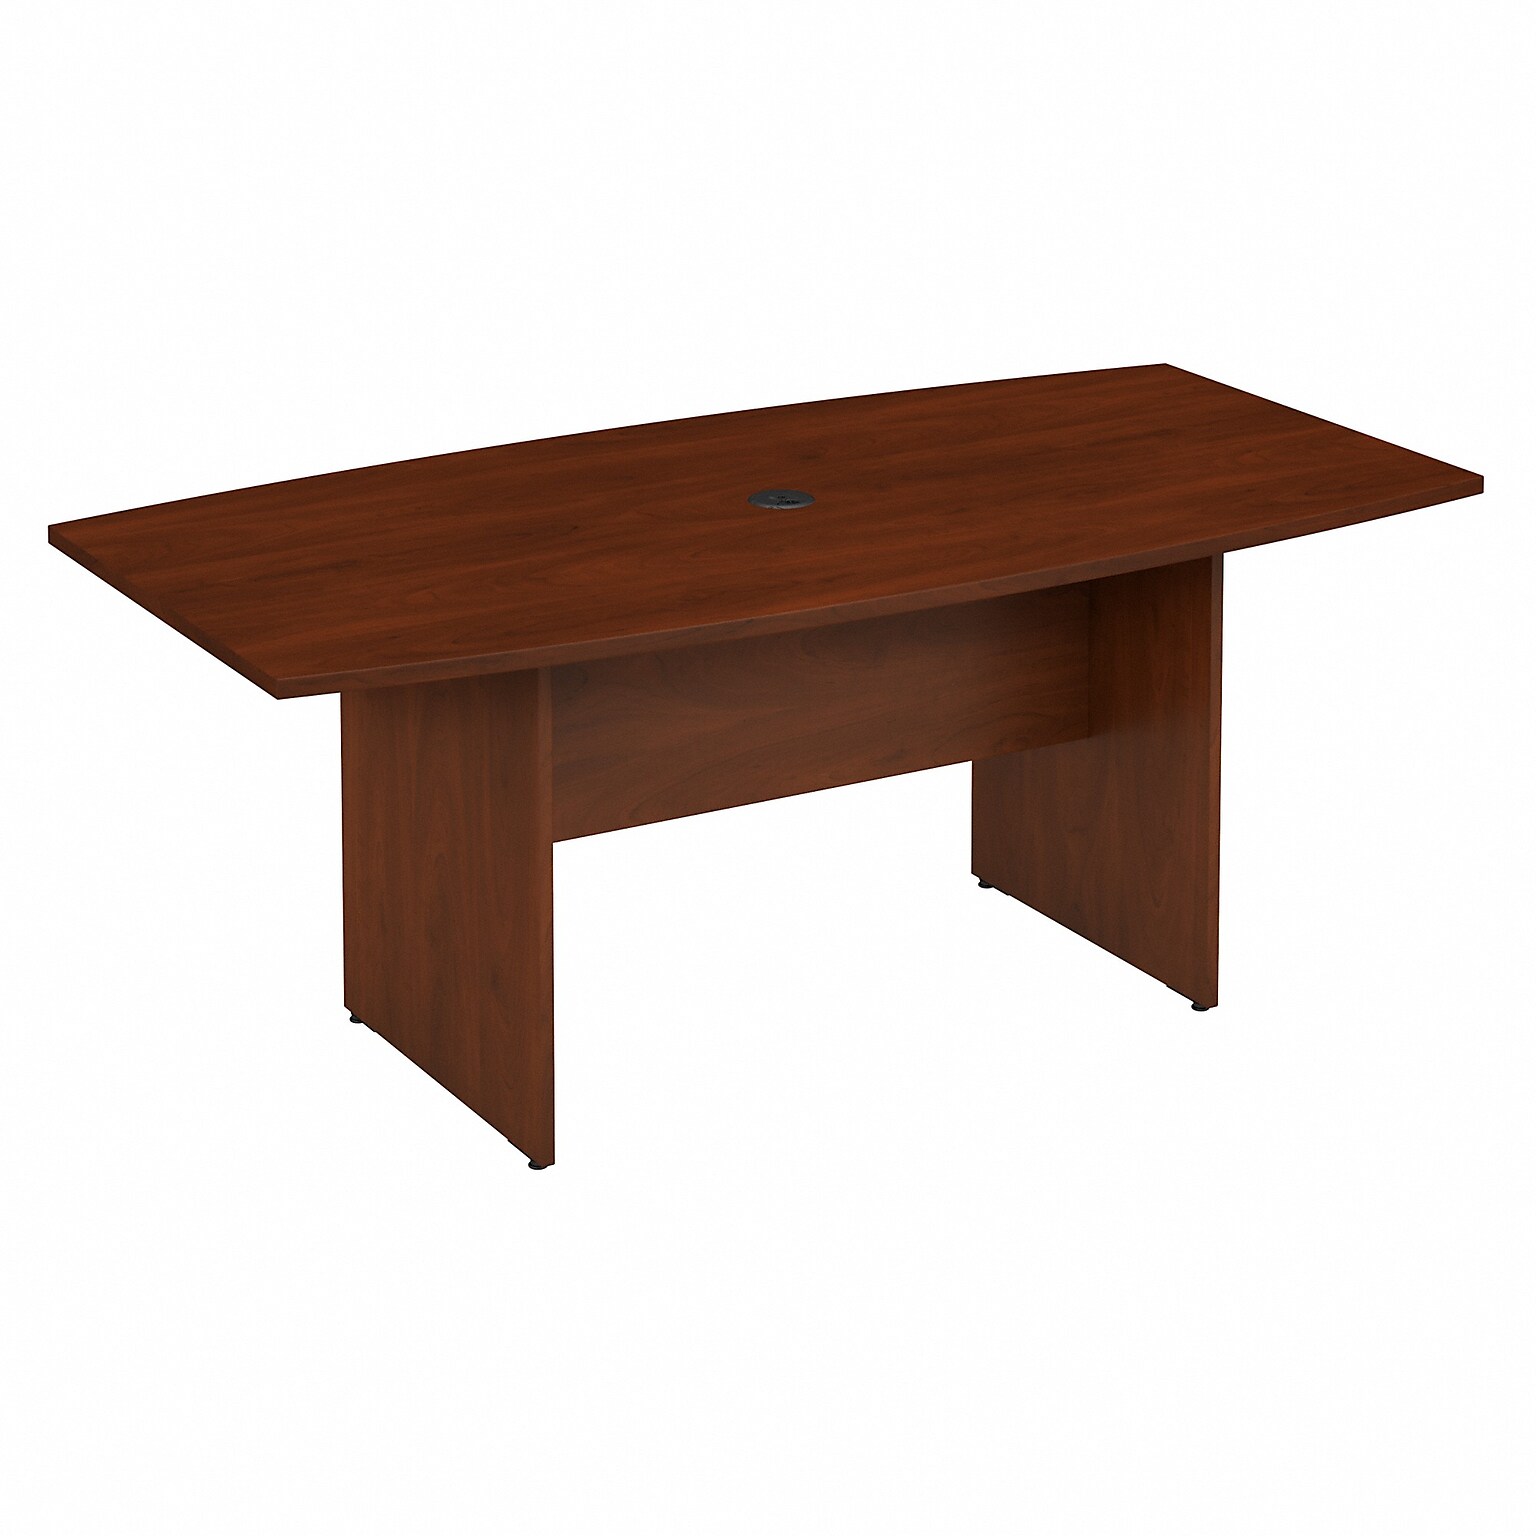 Bush Business Furniture 72W x 36D Boat Shaped Conference Table with Wood Base, Hansen Cherry (99TB7236HC)